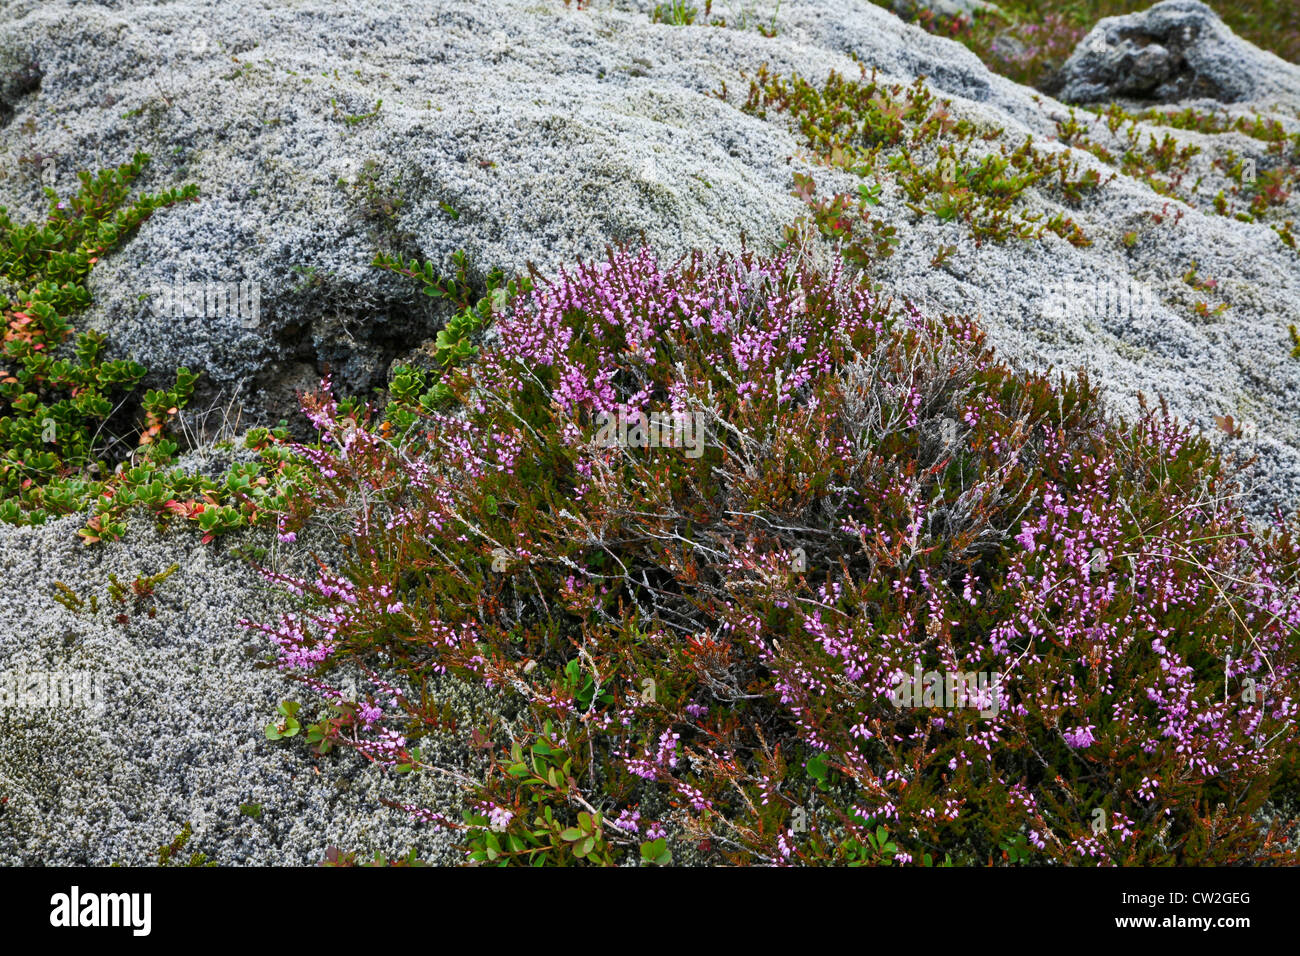 Reindeer Moss and wild Thymus praecox ssp. arcticus flowers growing among lava in the natural landscape of Iceland, Europe, botanicals, earth images Stock Photo